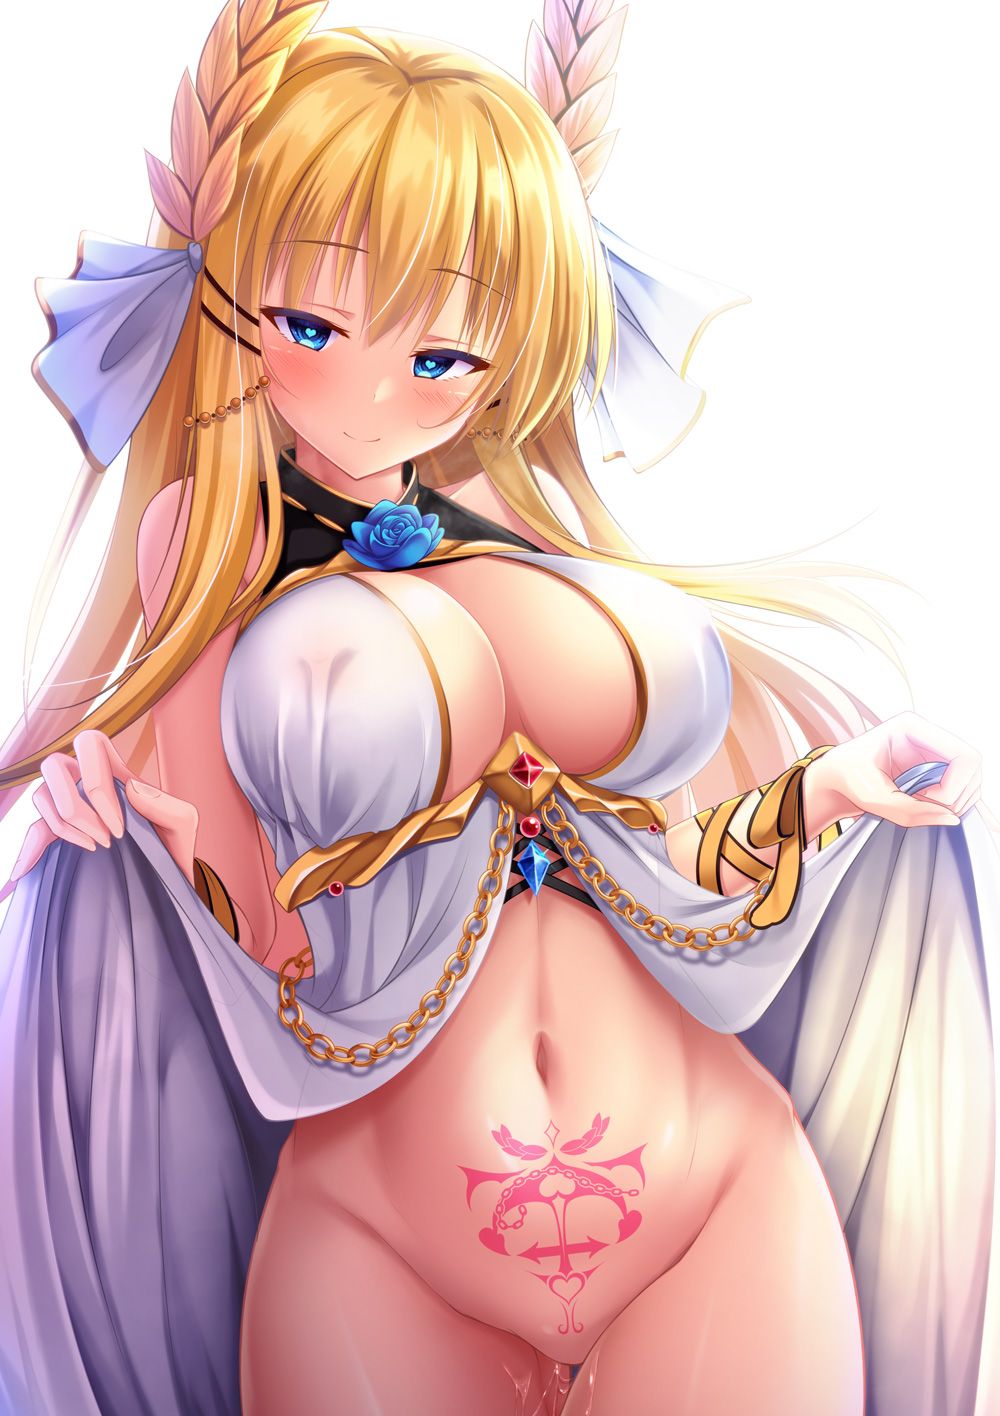 Blonde busty girl secondary images that 2 60 photos [Ero/non-erotic] 40